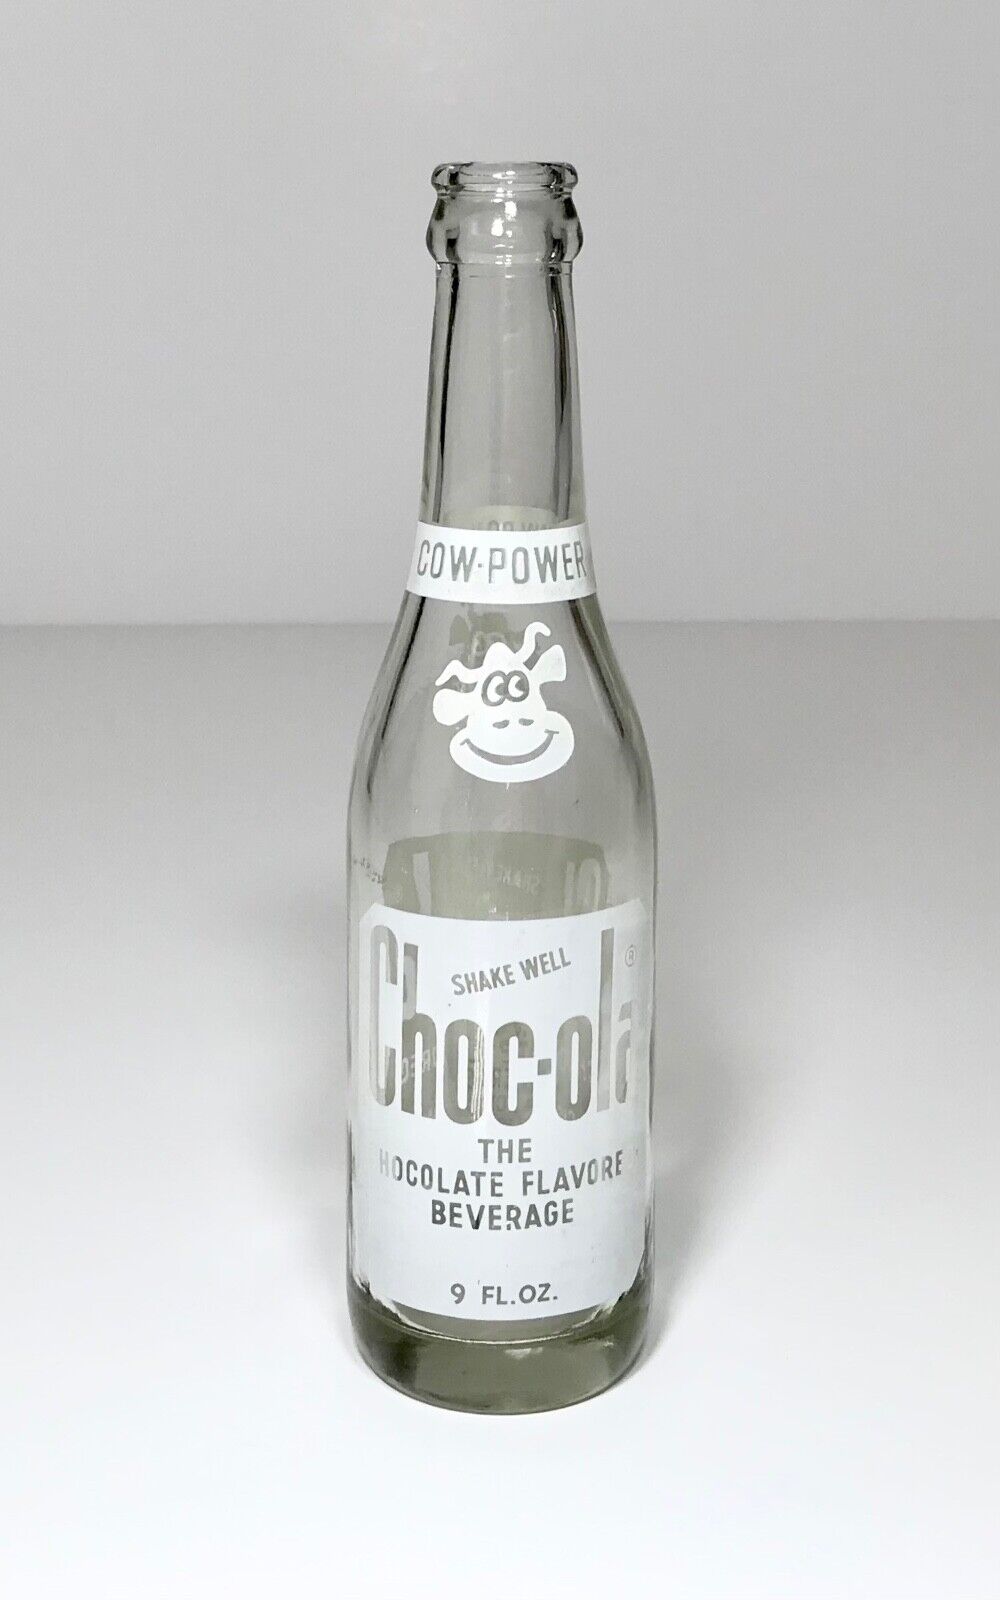 CHOC-OLA FLAVORED CHOCOLATE BEVERAGE CLEAR GLASS 9 OZ BOTTLE PAINTED LABEL1980s